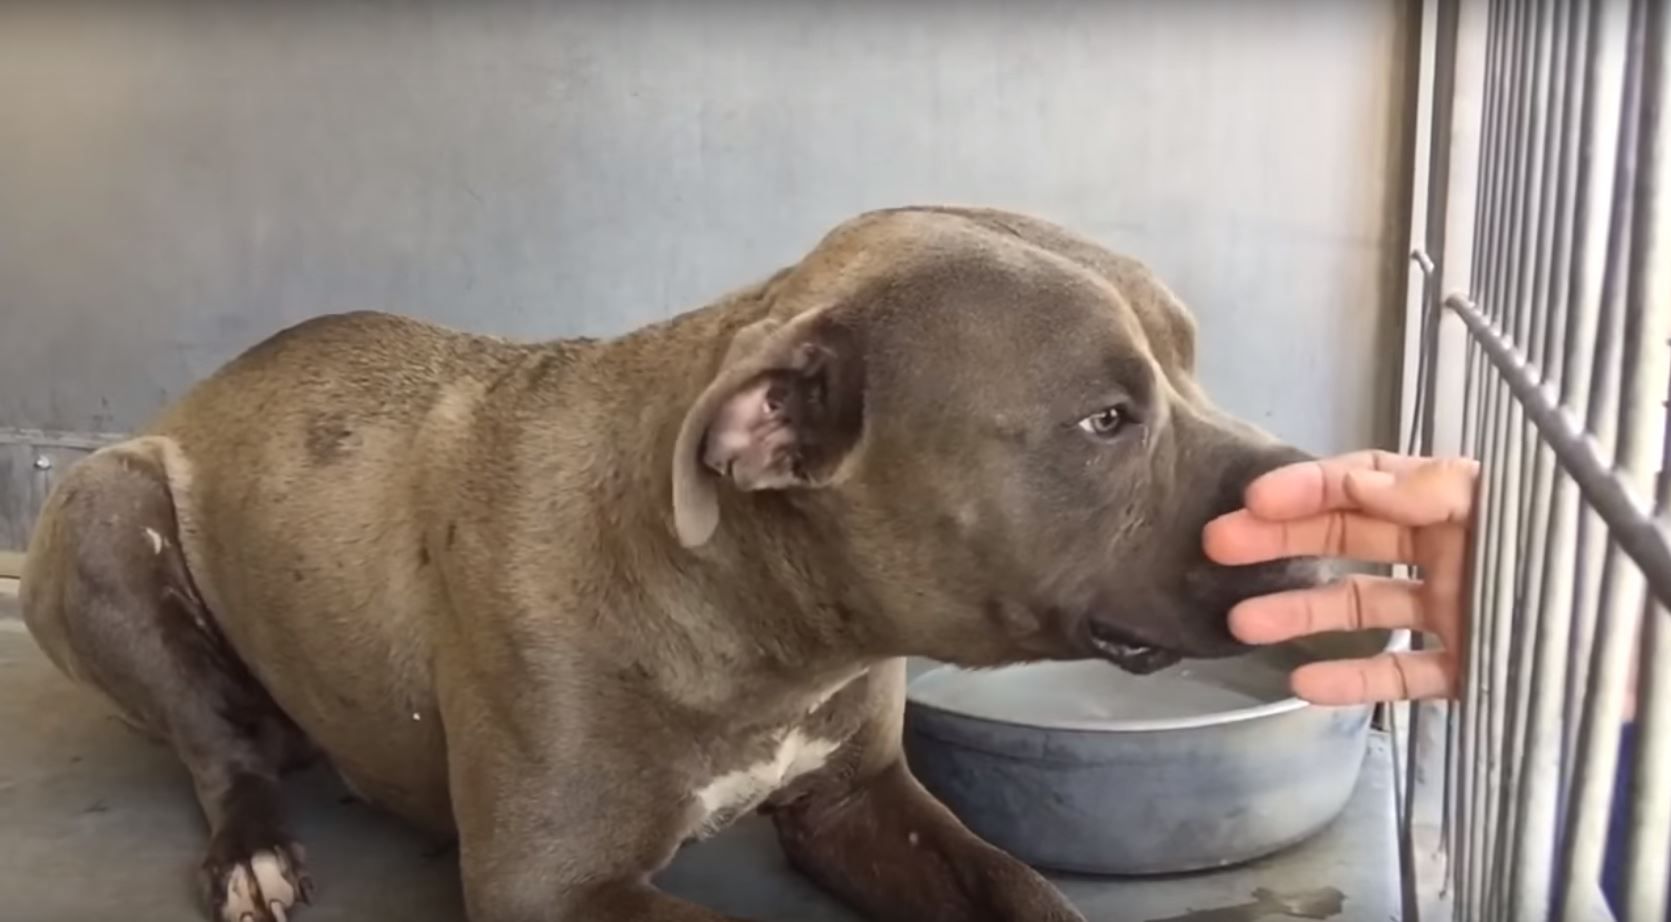 Watch This “Aggressive” Pit Bull React To Human Contact